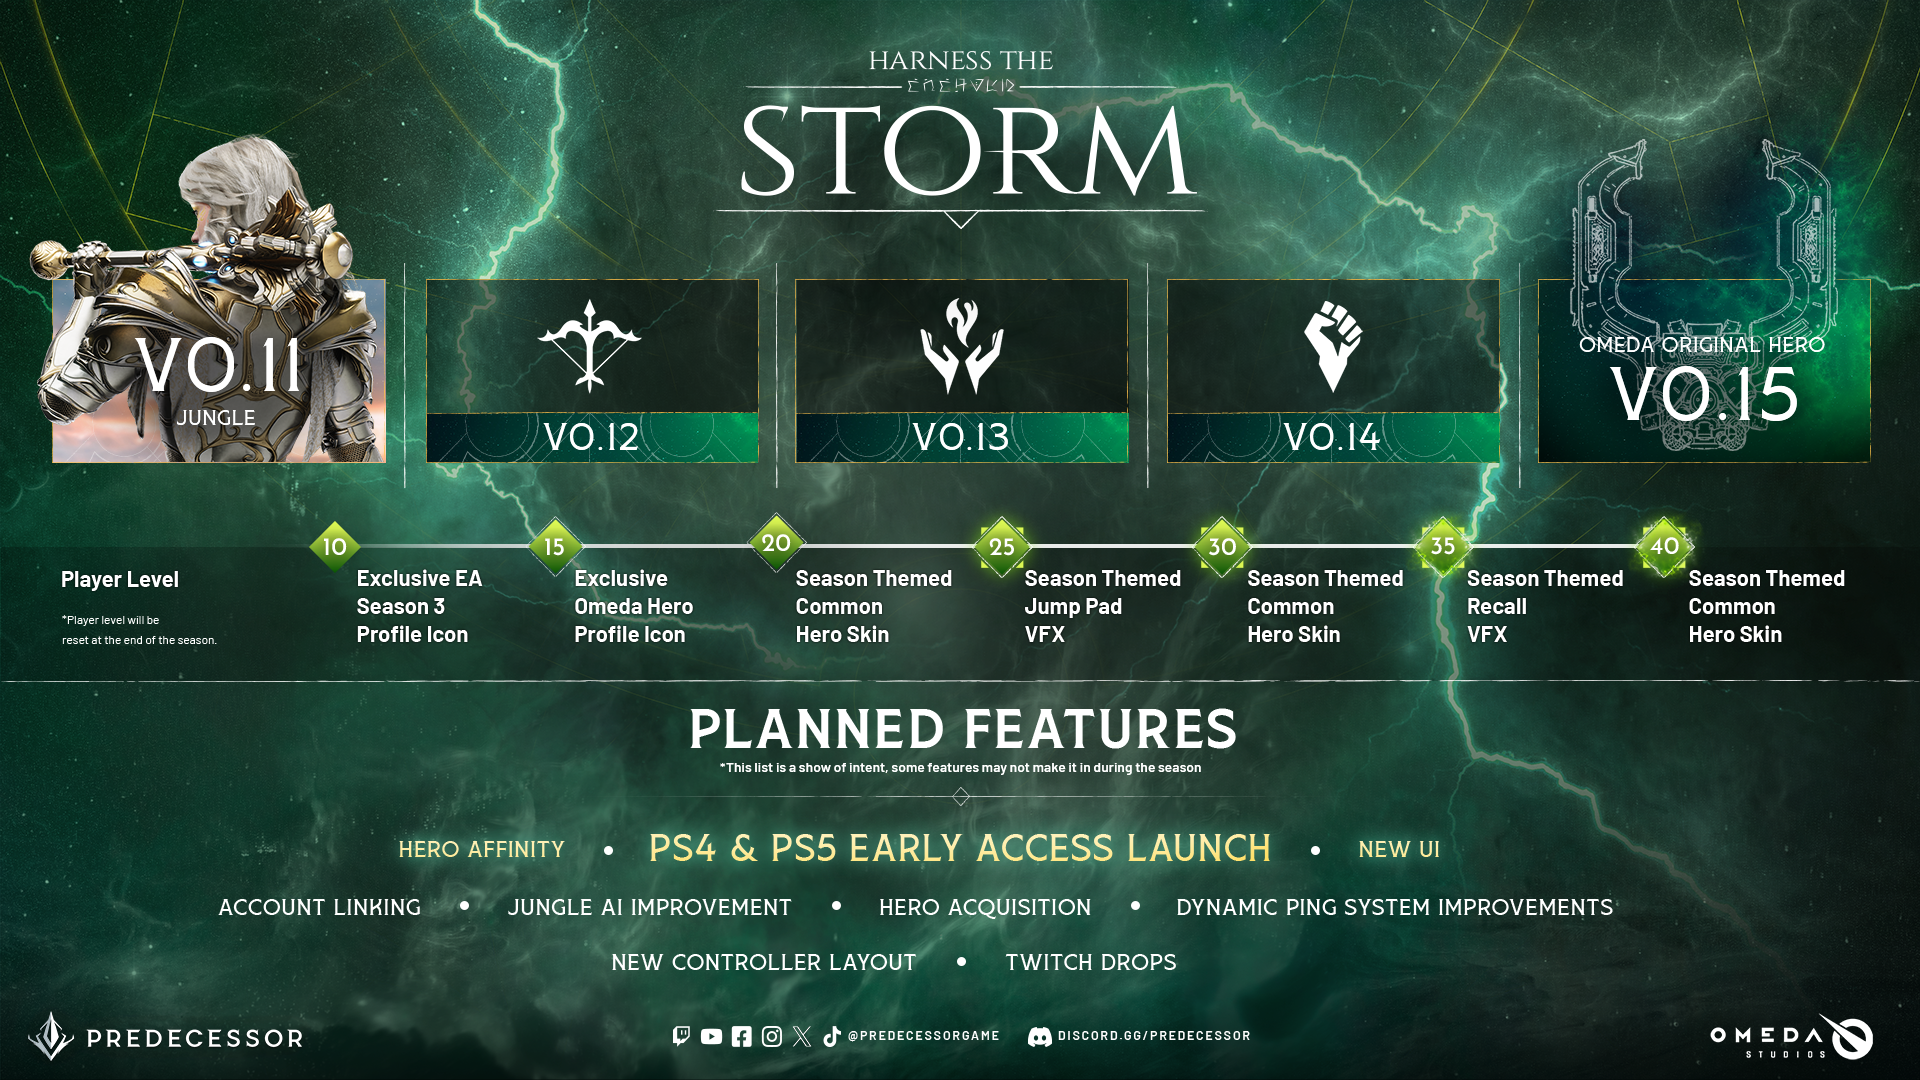 Harness the Storm_Season 3_1920x1080 (1).png